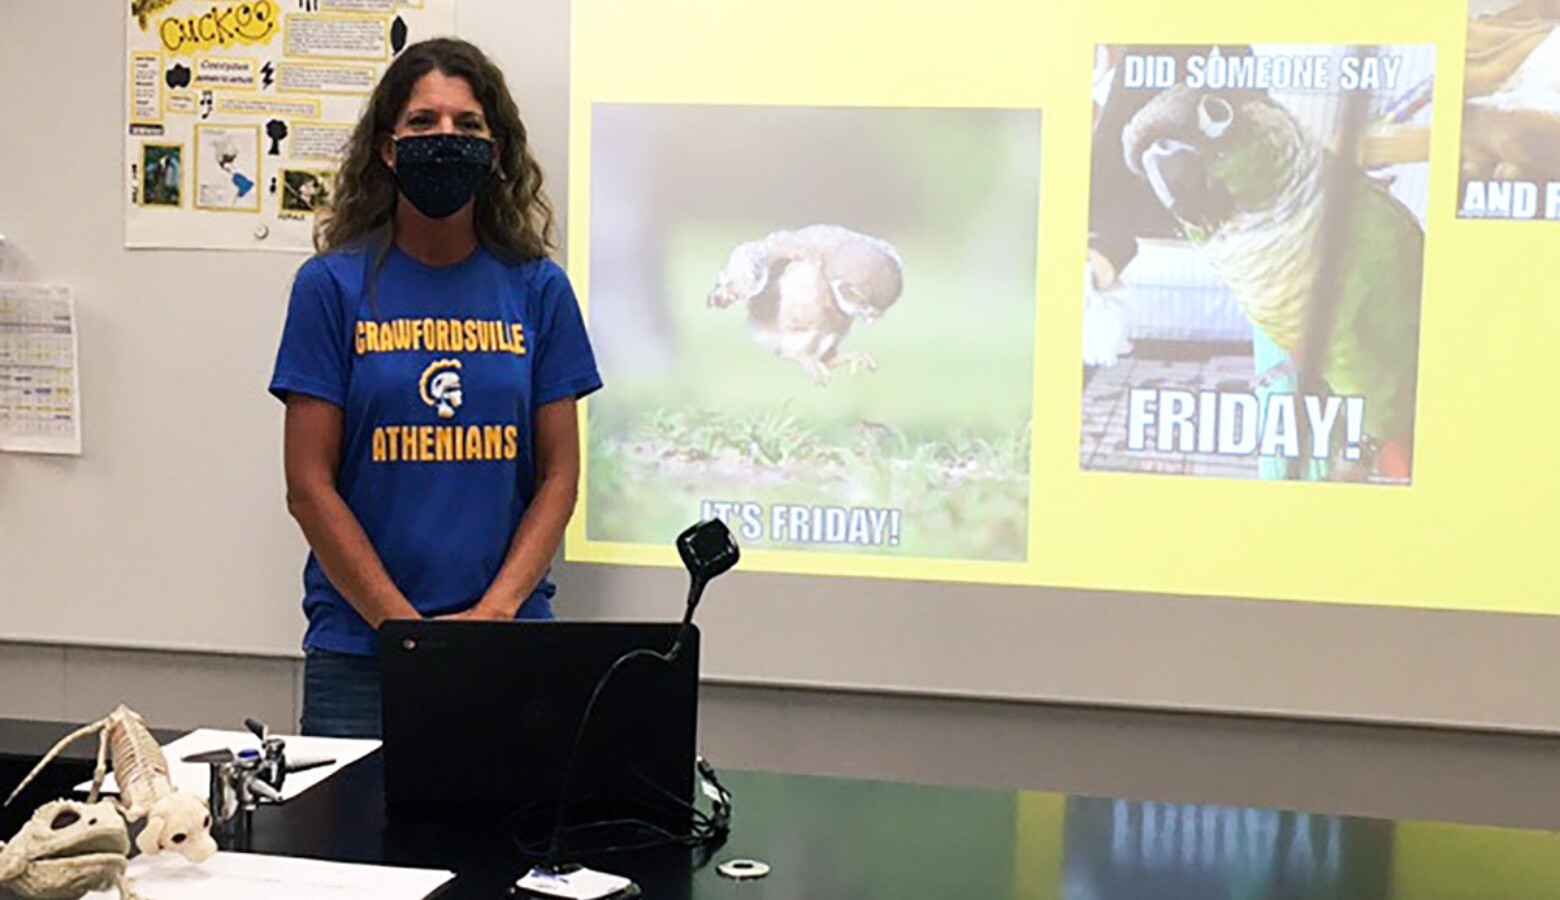 Crawfordsville science teacher Jenny Veatch says it was difficult adjusting her teaching style when students returned to school, but took precautions so she could stay in the classroom. (Provided by Jenny Veatch)